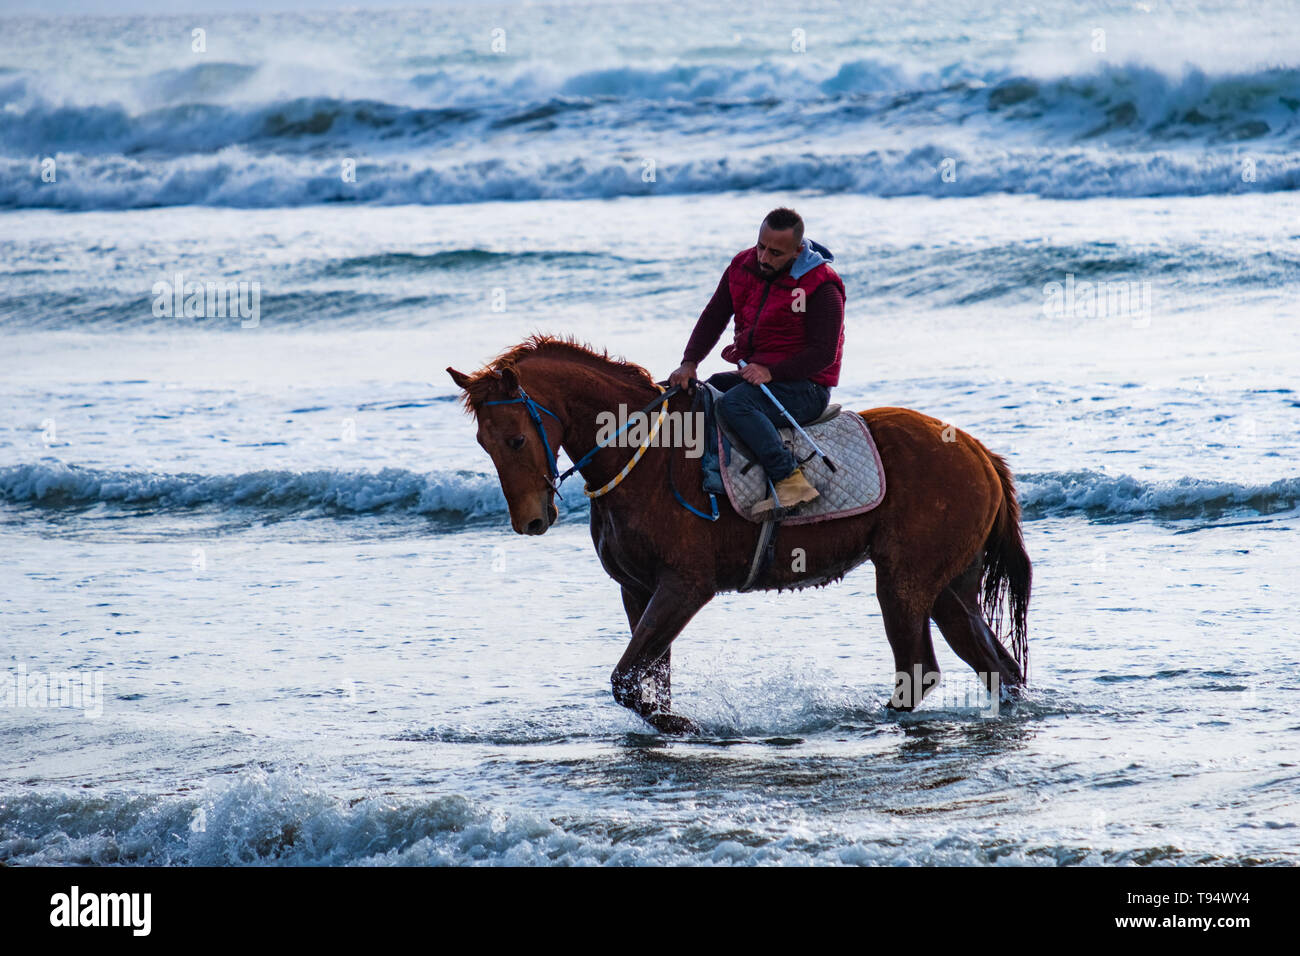 Ayia Eirini, Cyprus - 24 March, 2019: Man riding on a brown galloping horse in the sea waters of Ayia Erini beach in Cyprus against a rough sea Stock Photo